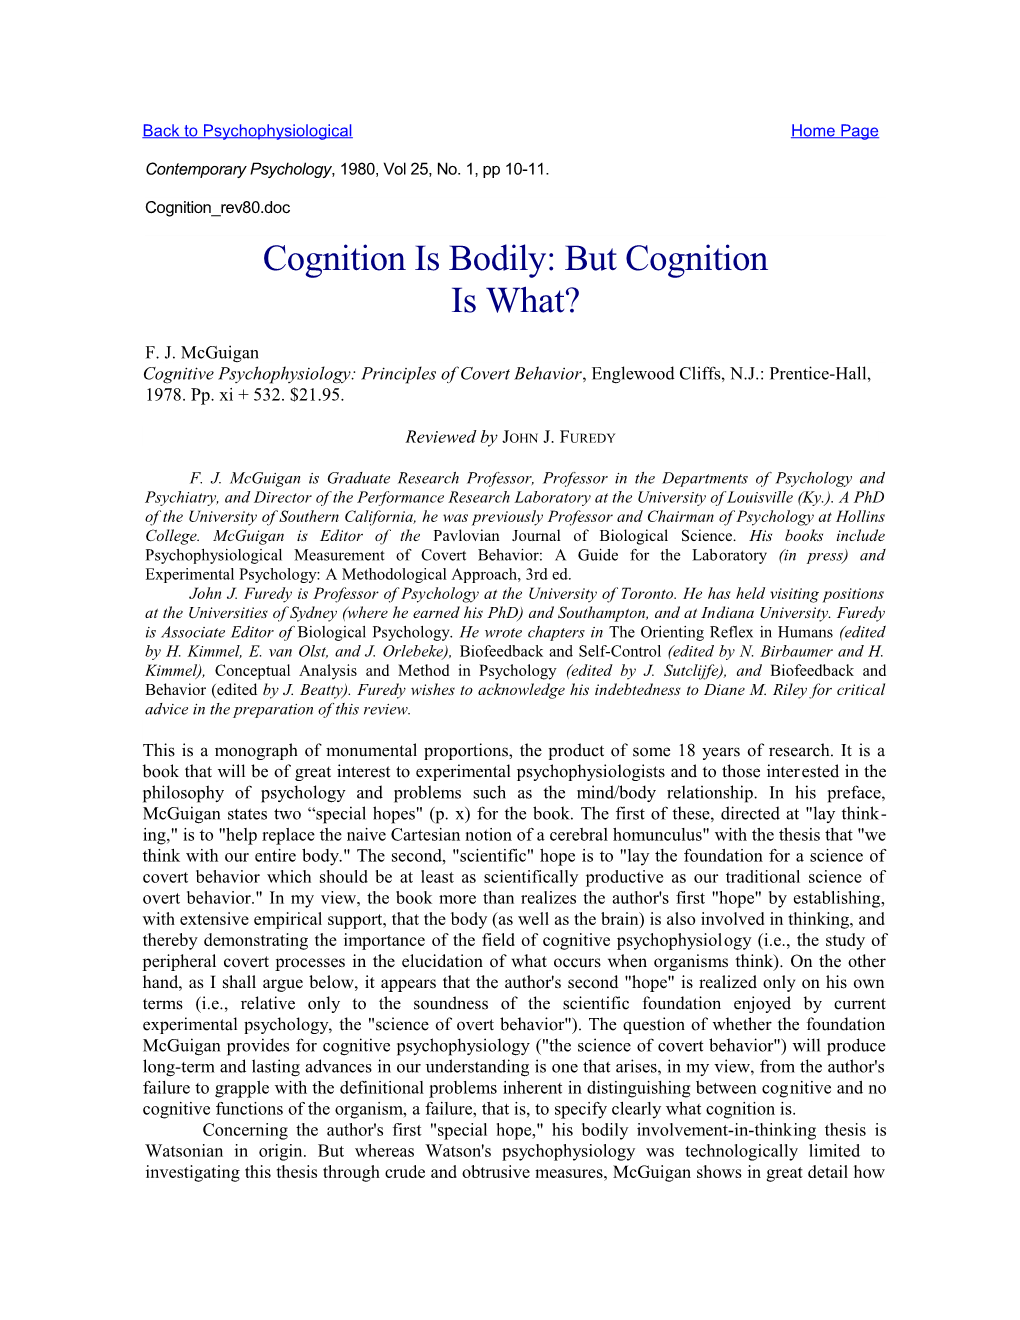 Cognition Is Bodily: but Cognition